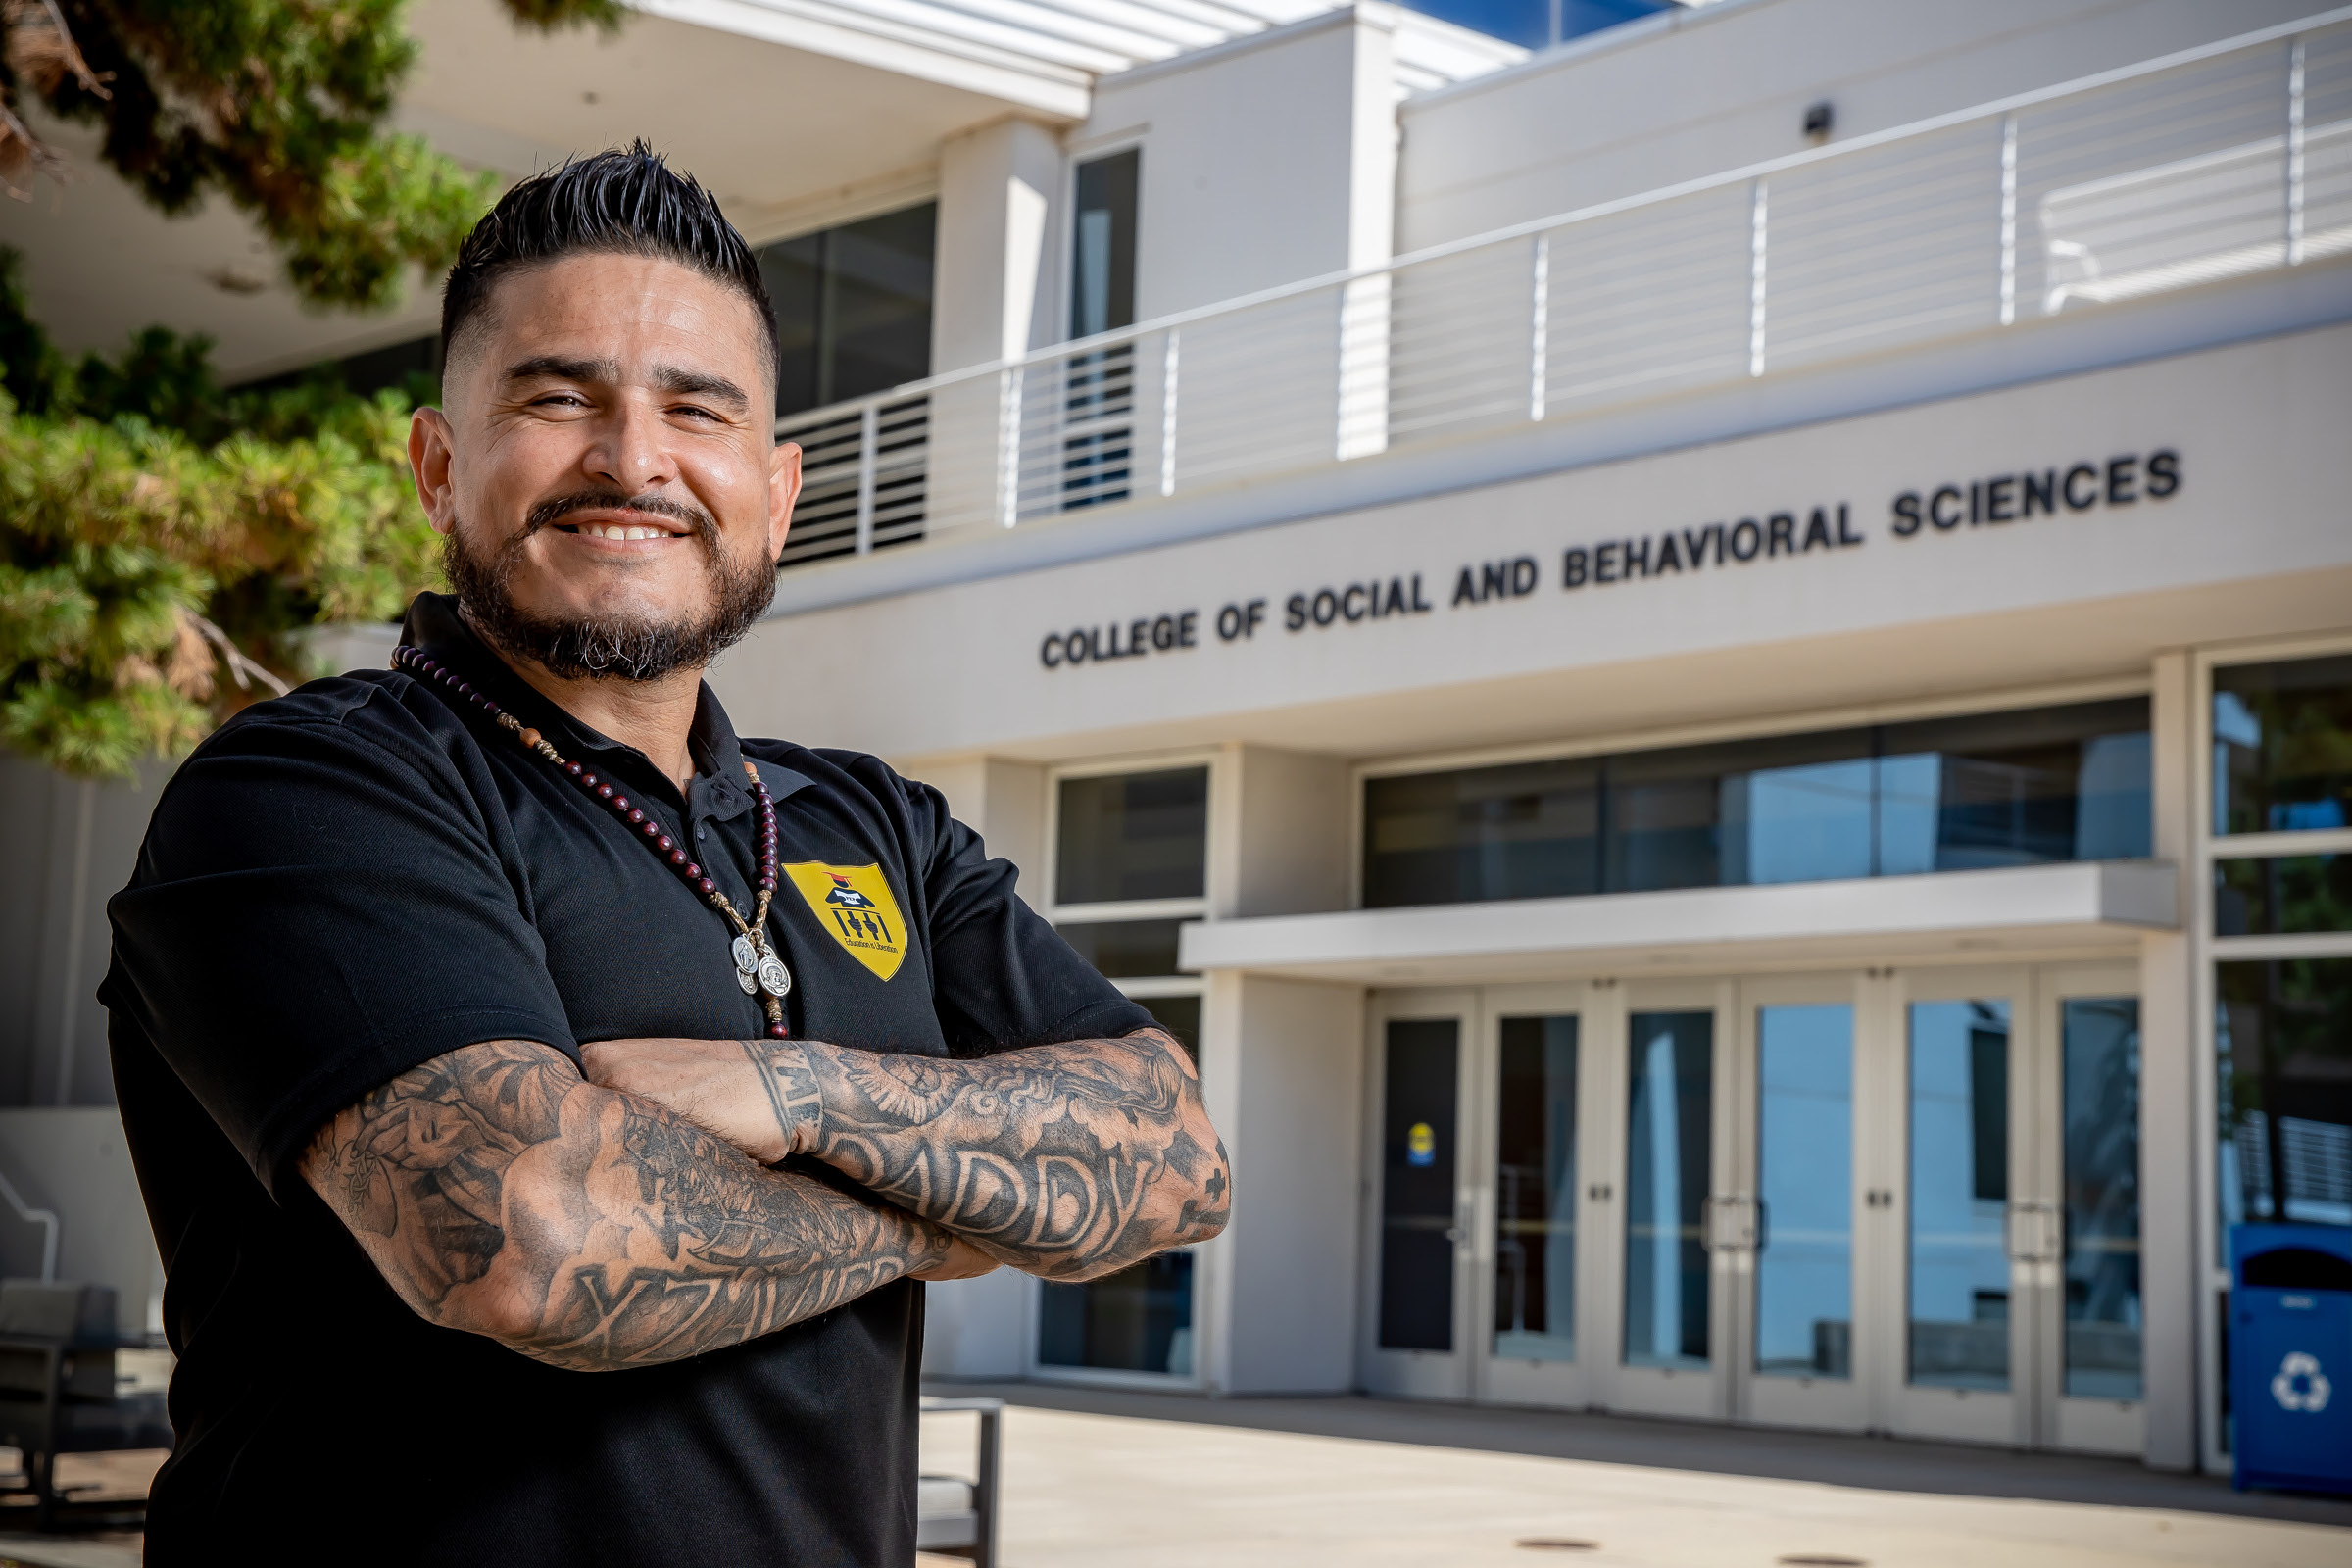 Eric Tafoya, sociology student in the College of Social and Behavioral Sciences